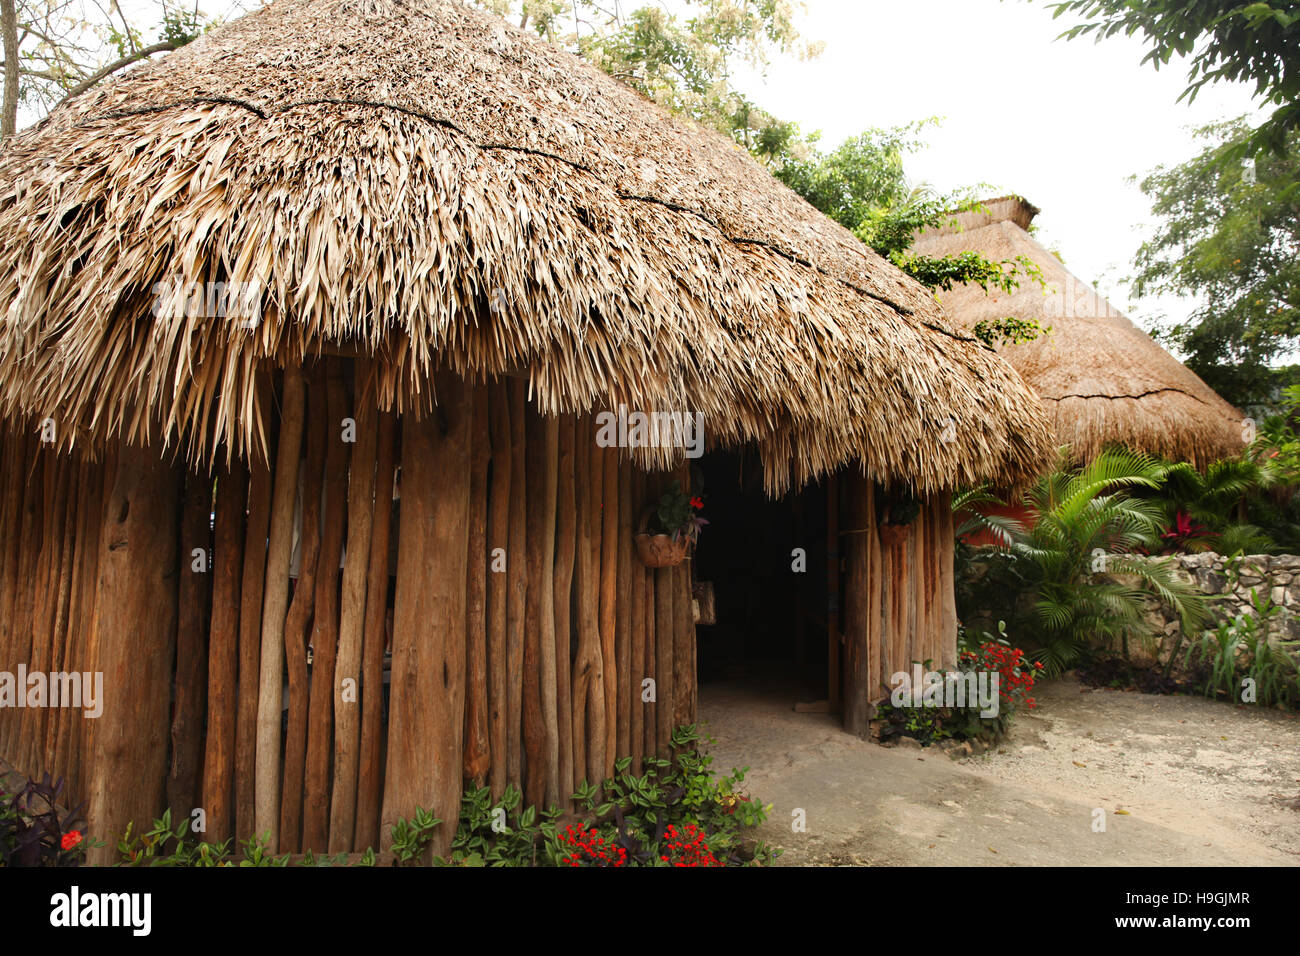 Traditional hut or home made from natural materials & thatched roof, Cozumel, Yucatan Peninsula, Quintana Roo, Mexico. Stock Photo